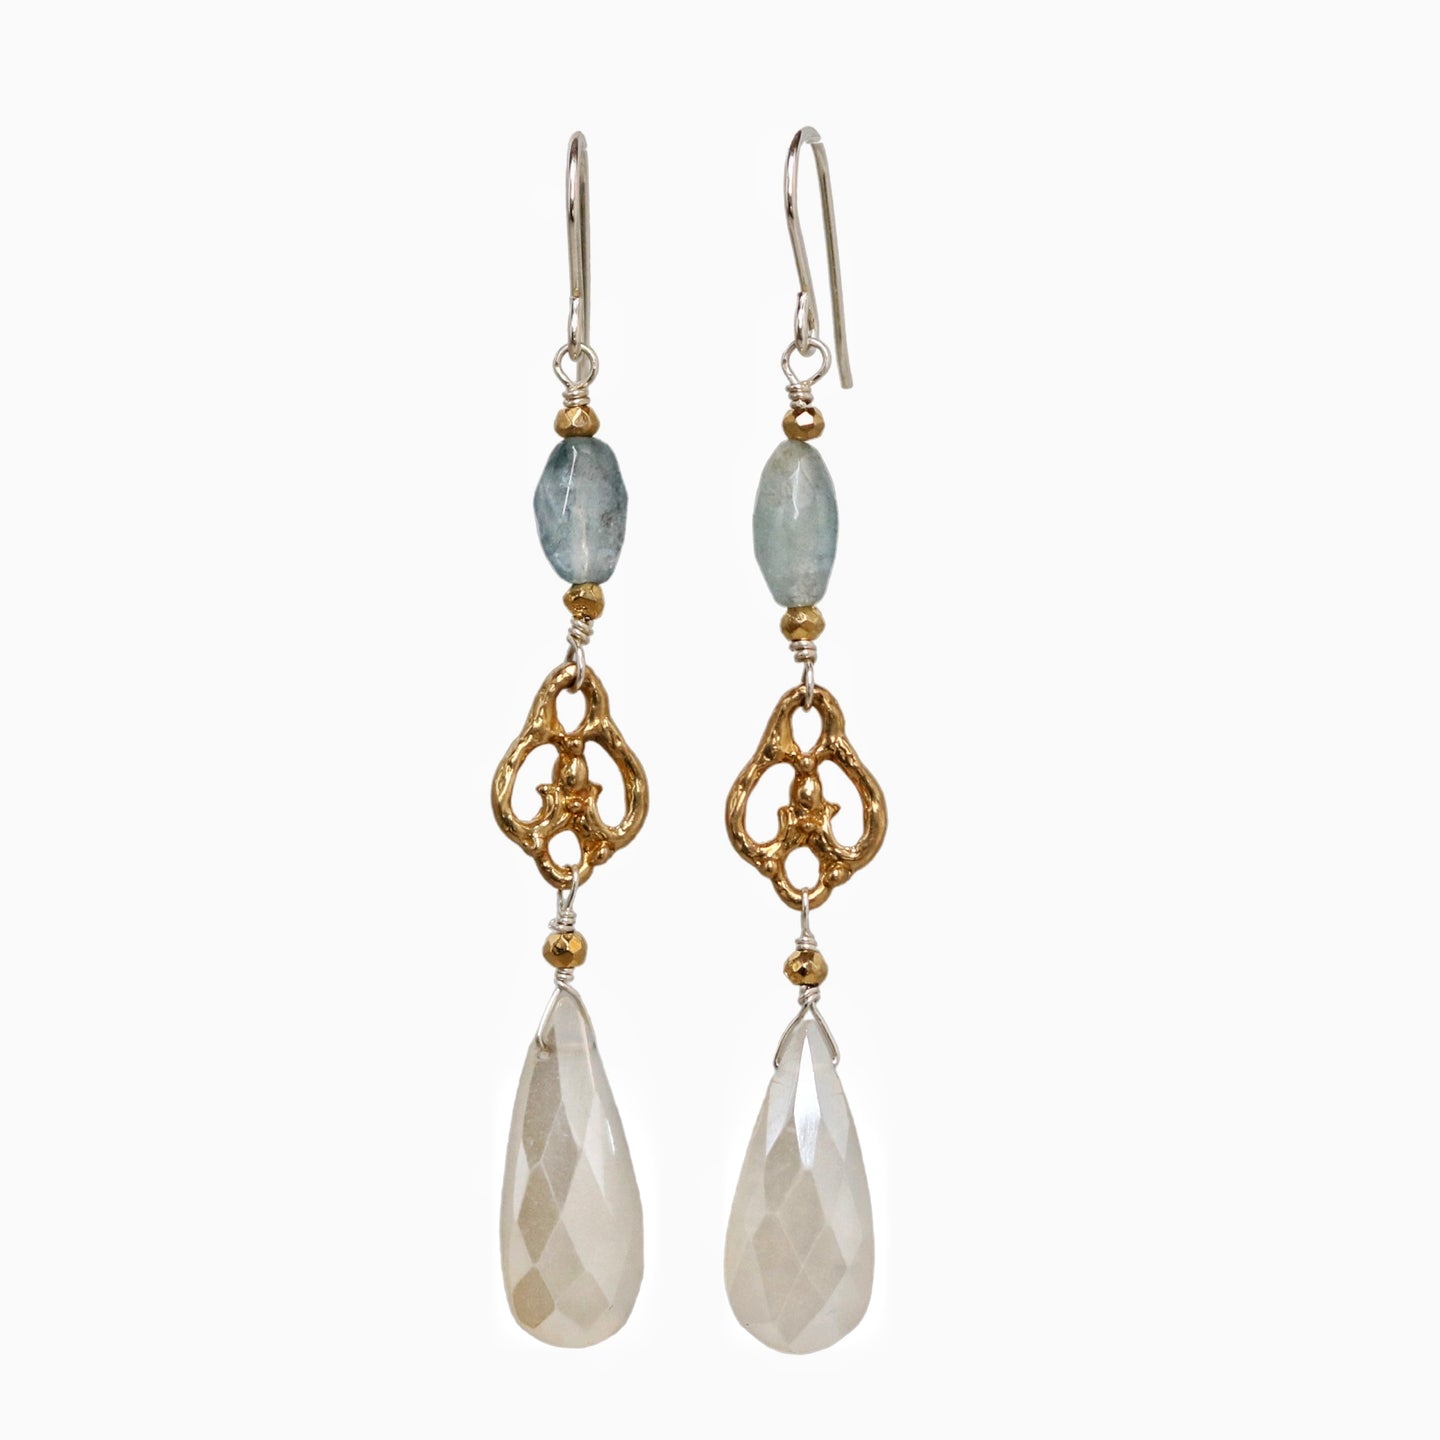 Lux Dangle Earrings Bronze, Silver, Aquamarine and White Chalcedony